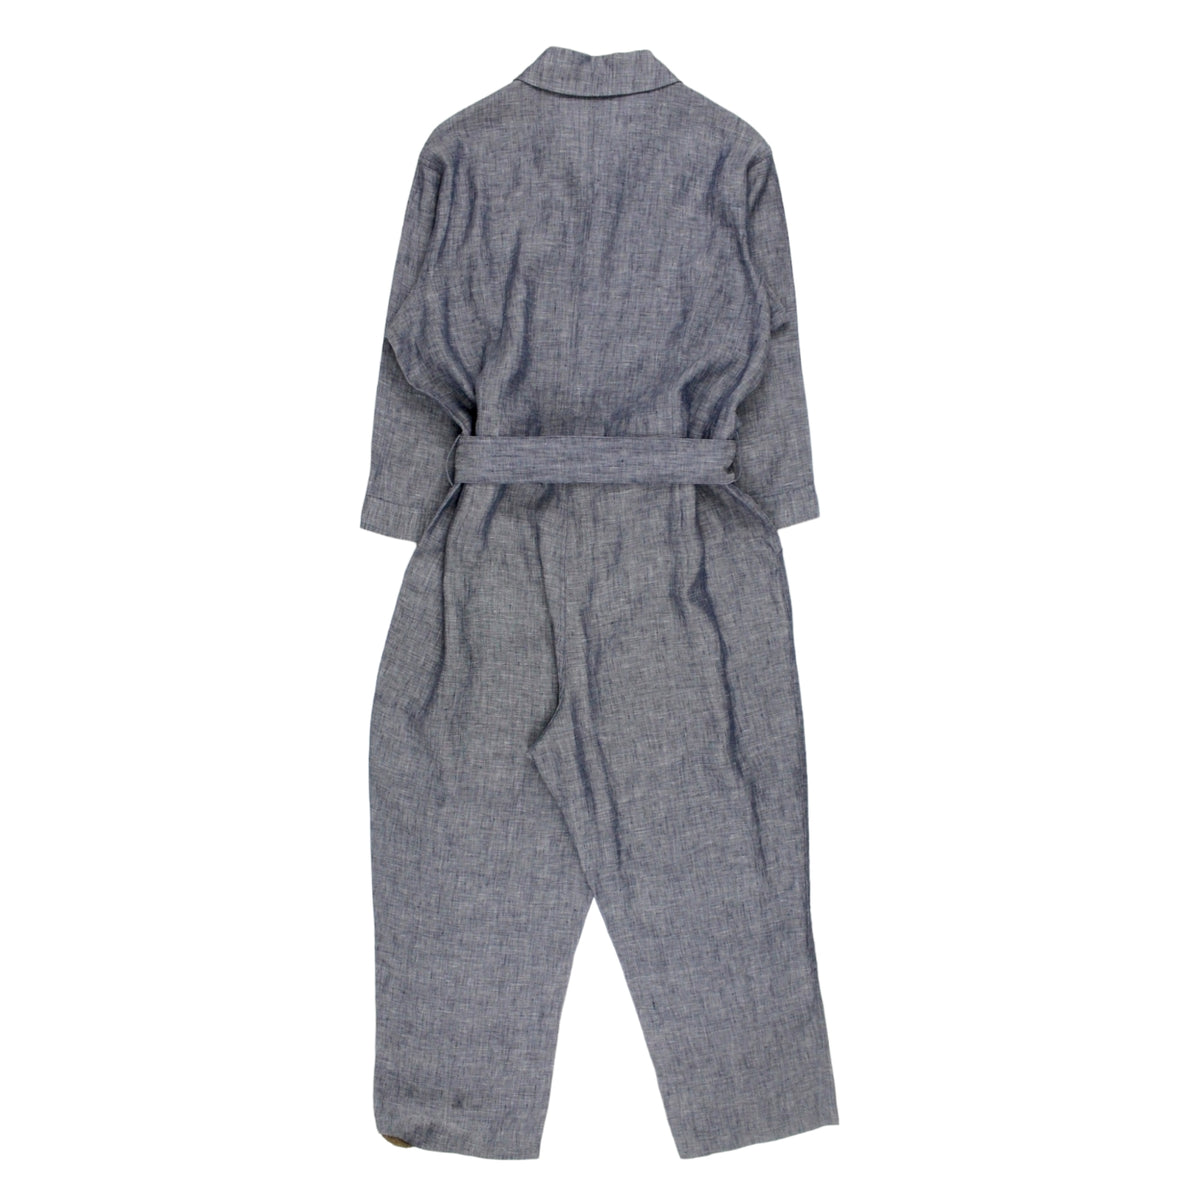 NRBY Navy Chambray Linen Jumpsuit - Sample